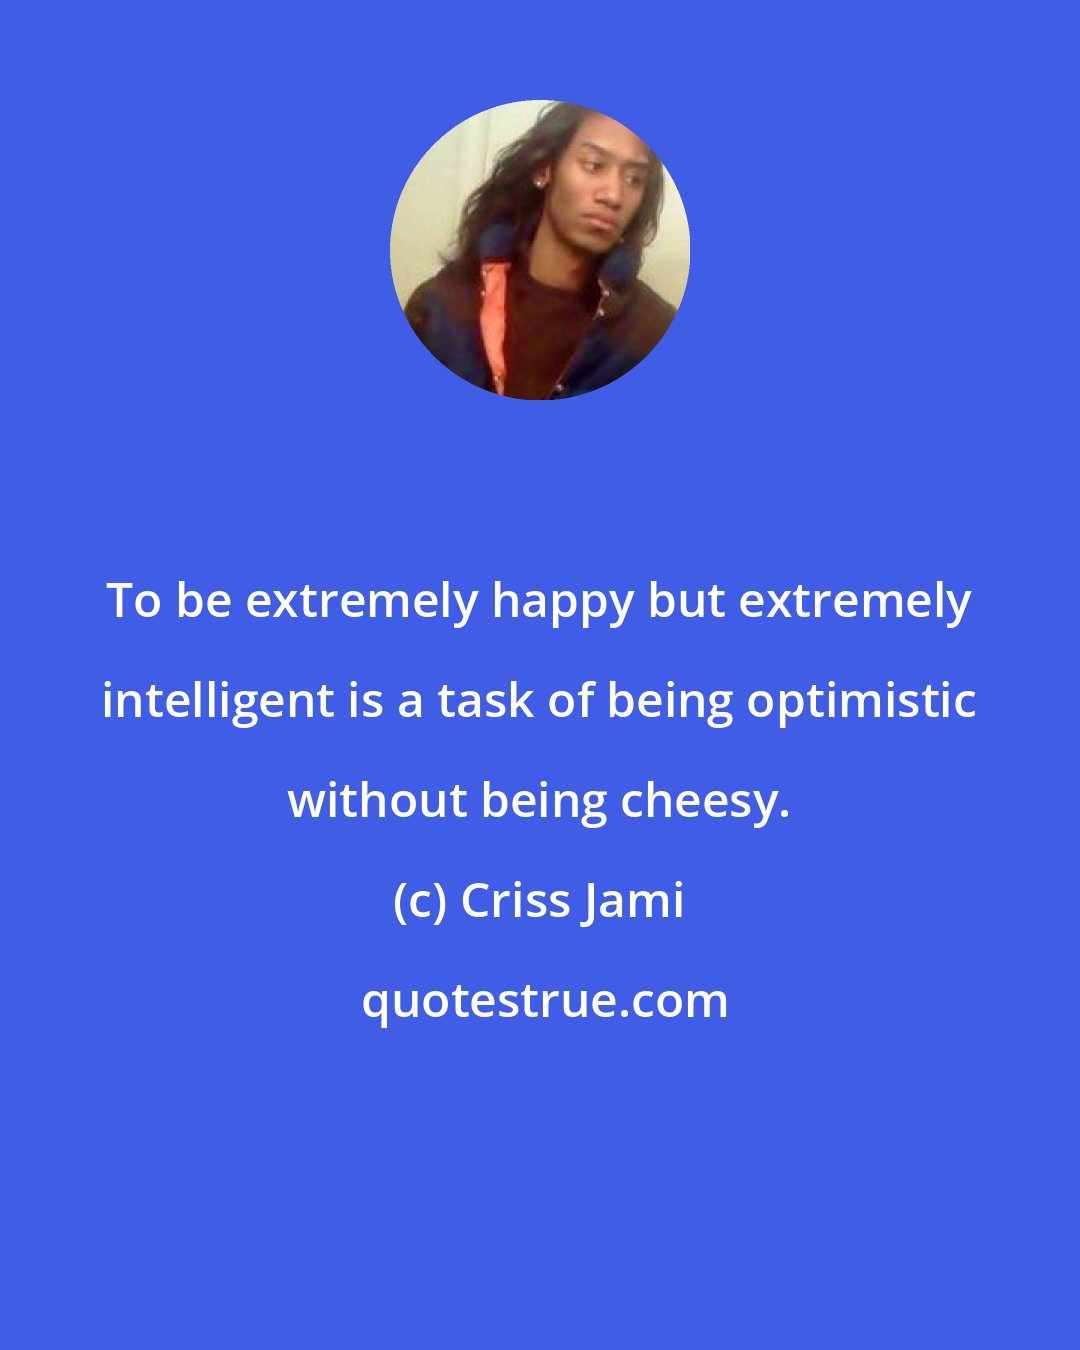 Criss Jami: To be extremely happy but extremely intelligent is a task of being optimistic without being cheesy.